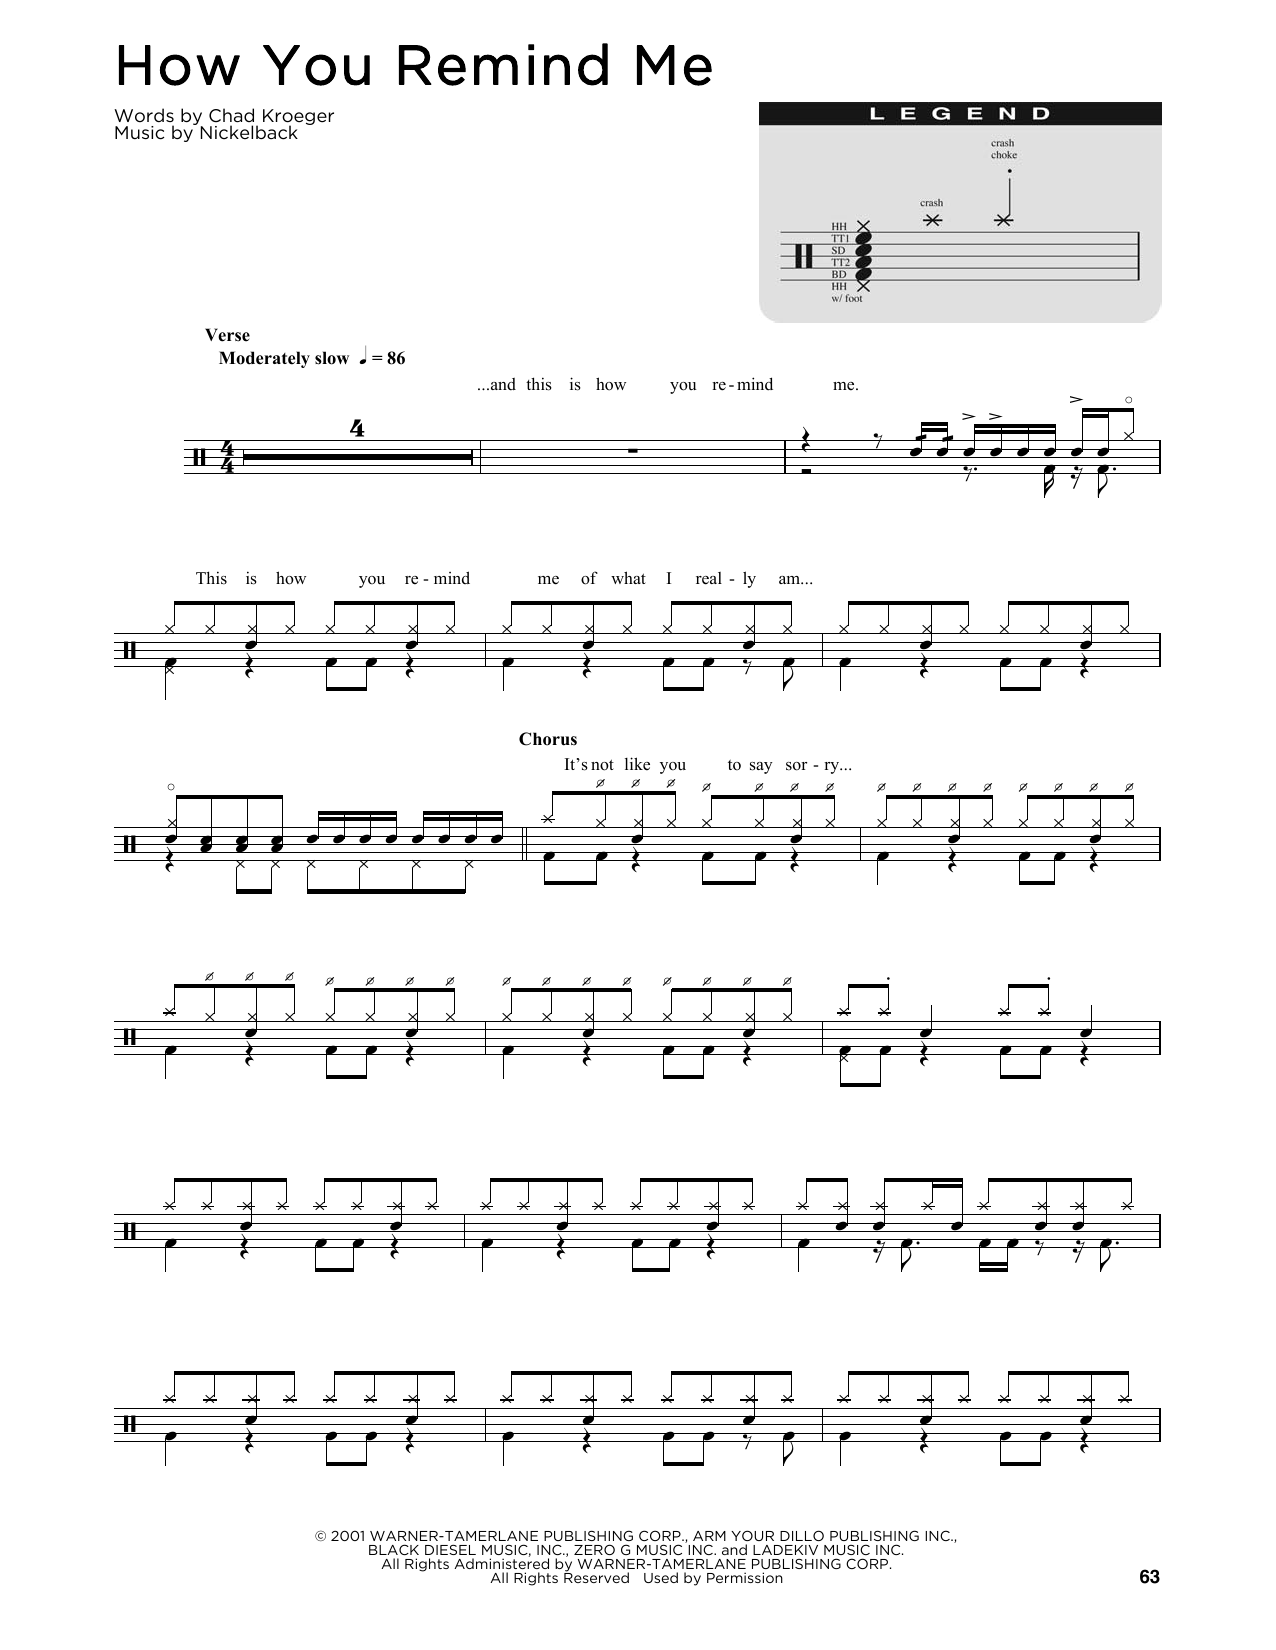 Download Nickelback How You Remind Me Sheet Music